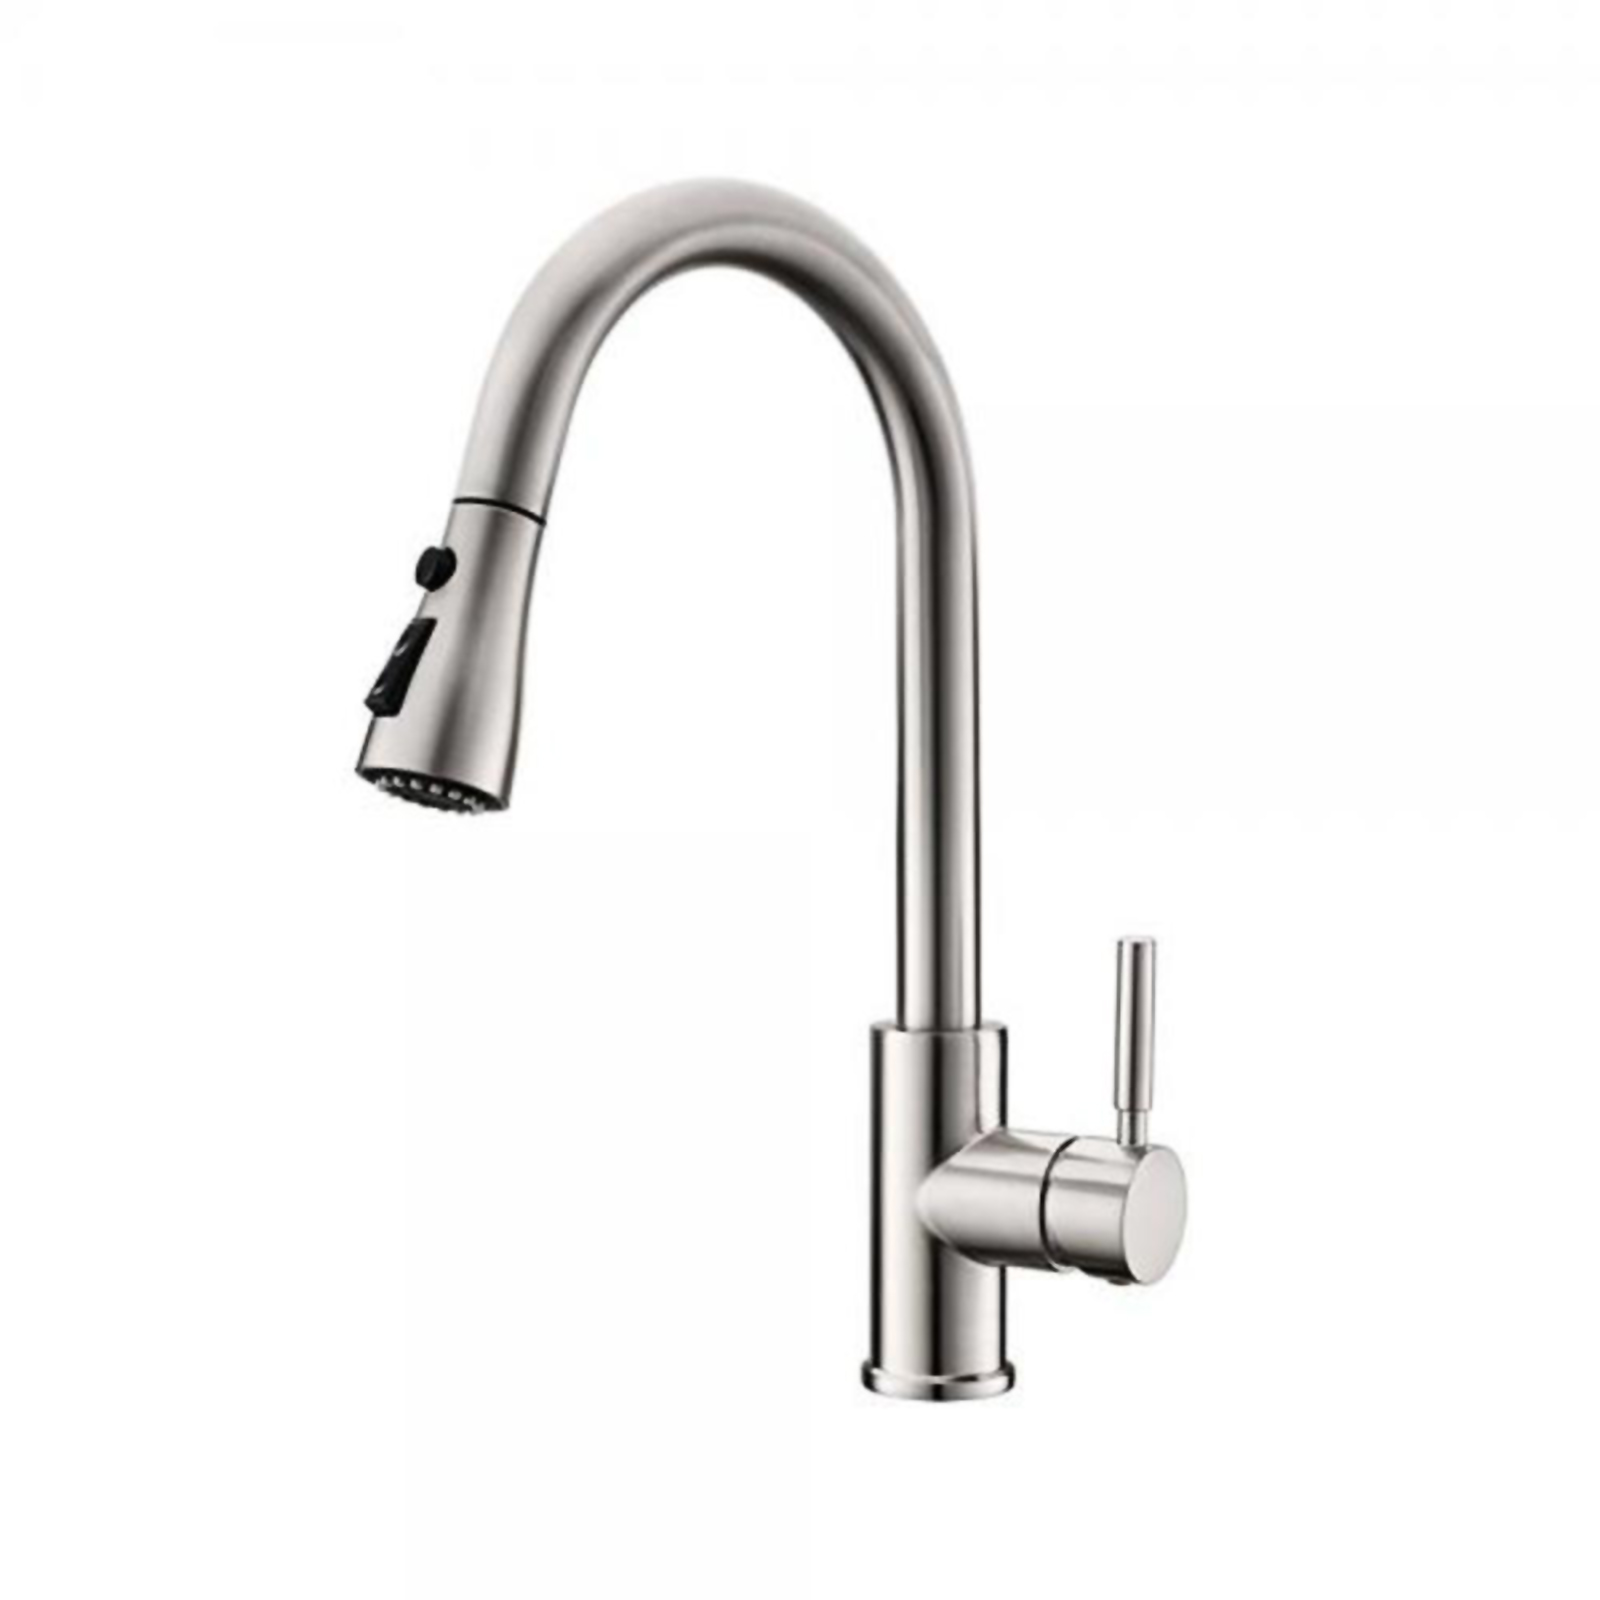 Wewe Single Handle 15.7" Pull Down Sprayer Kitchen Faucet - Brushed Nickel Finish